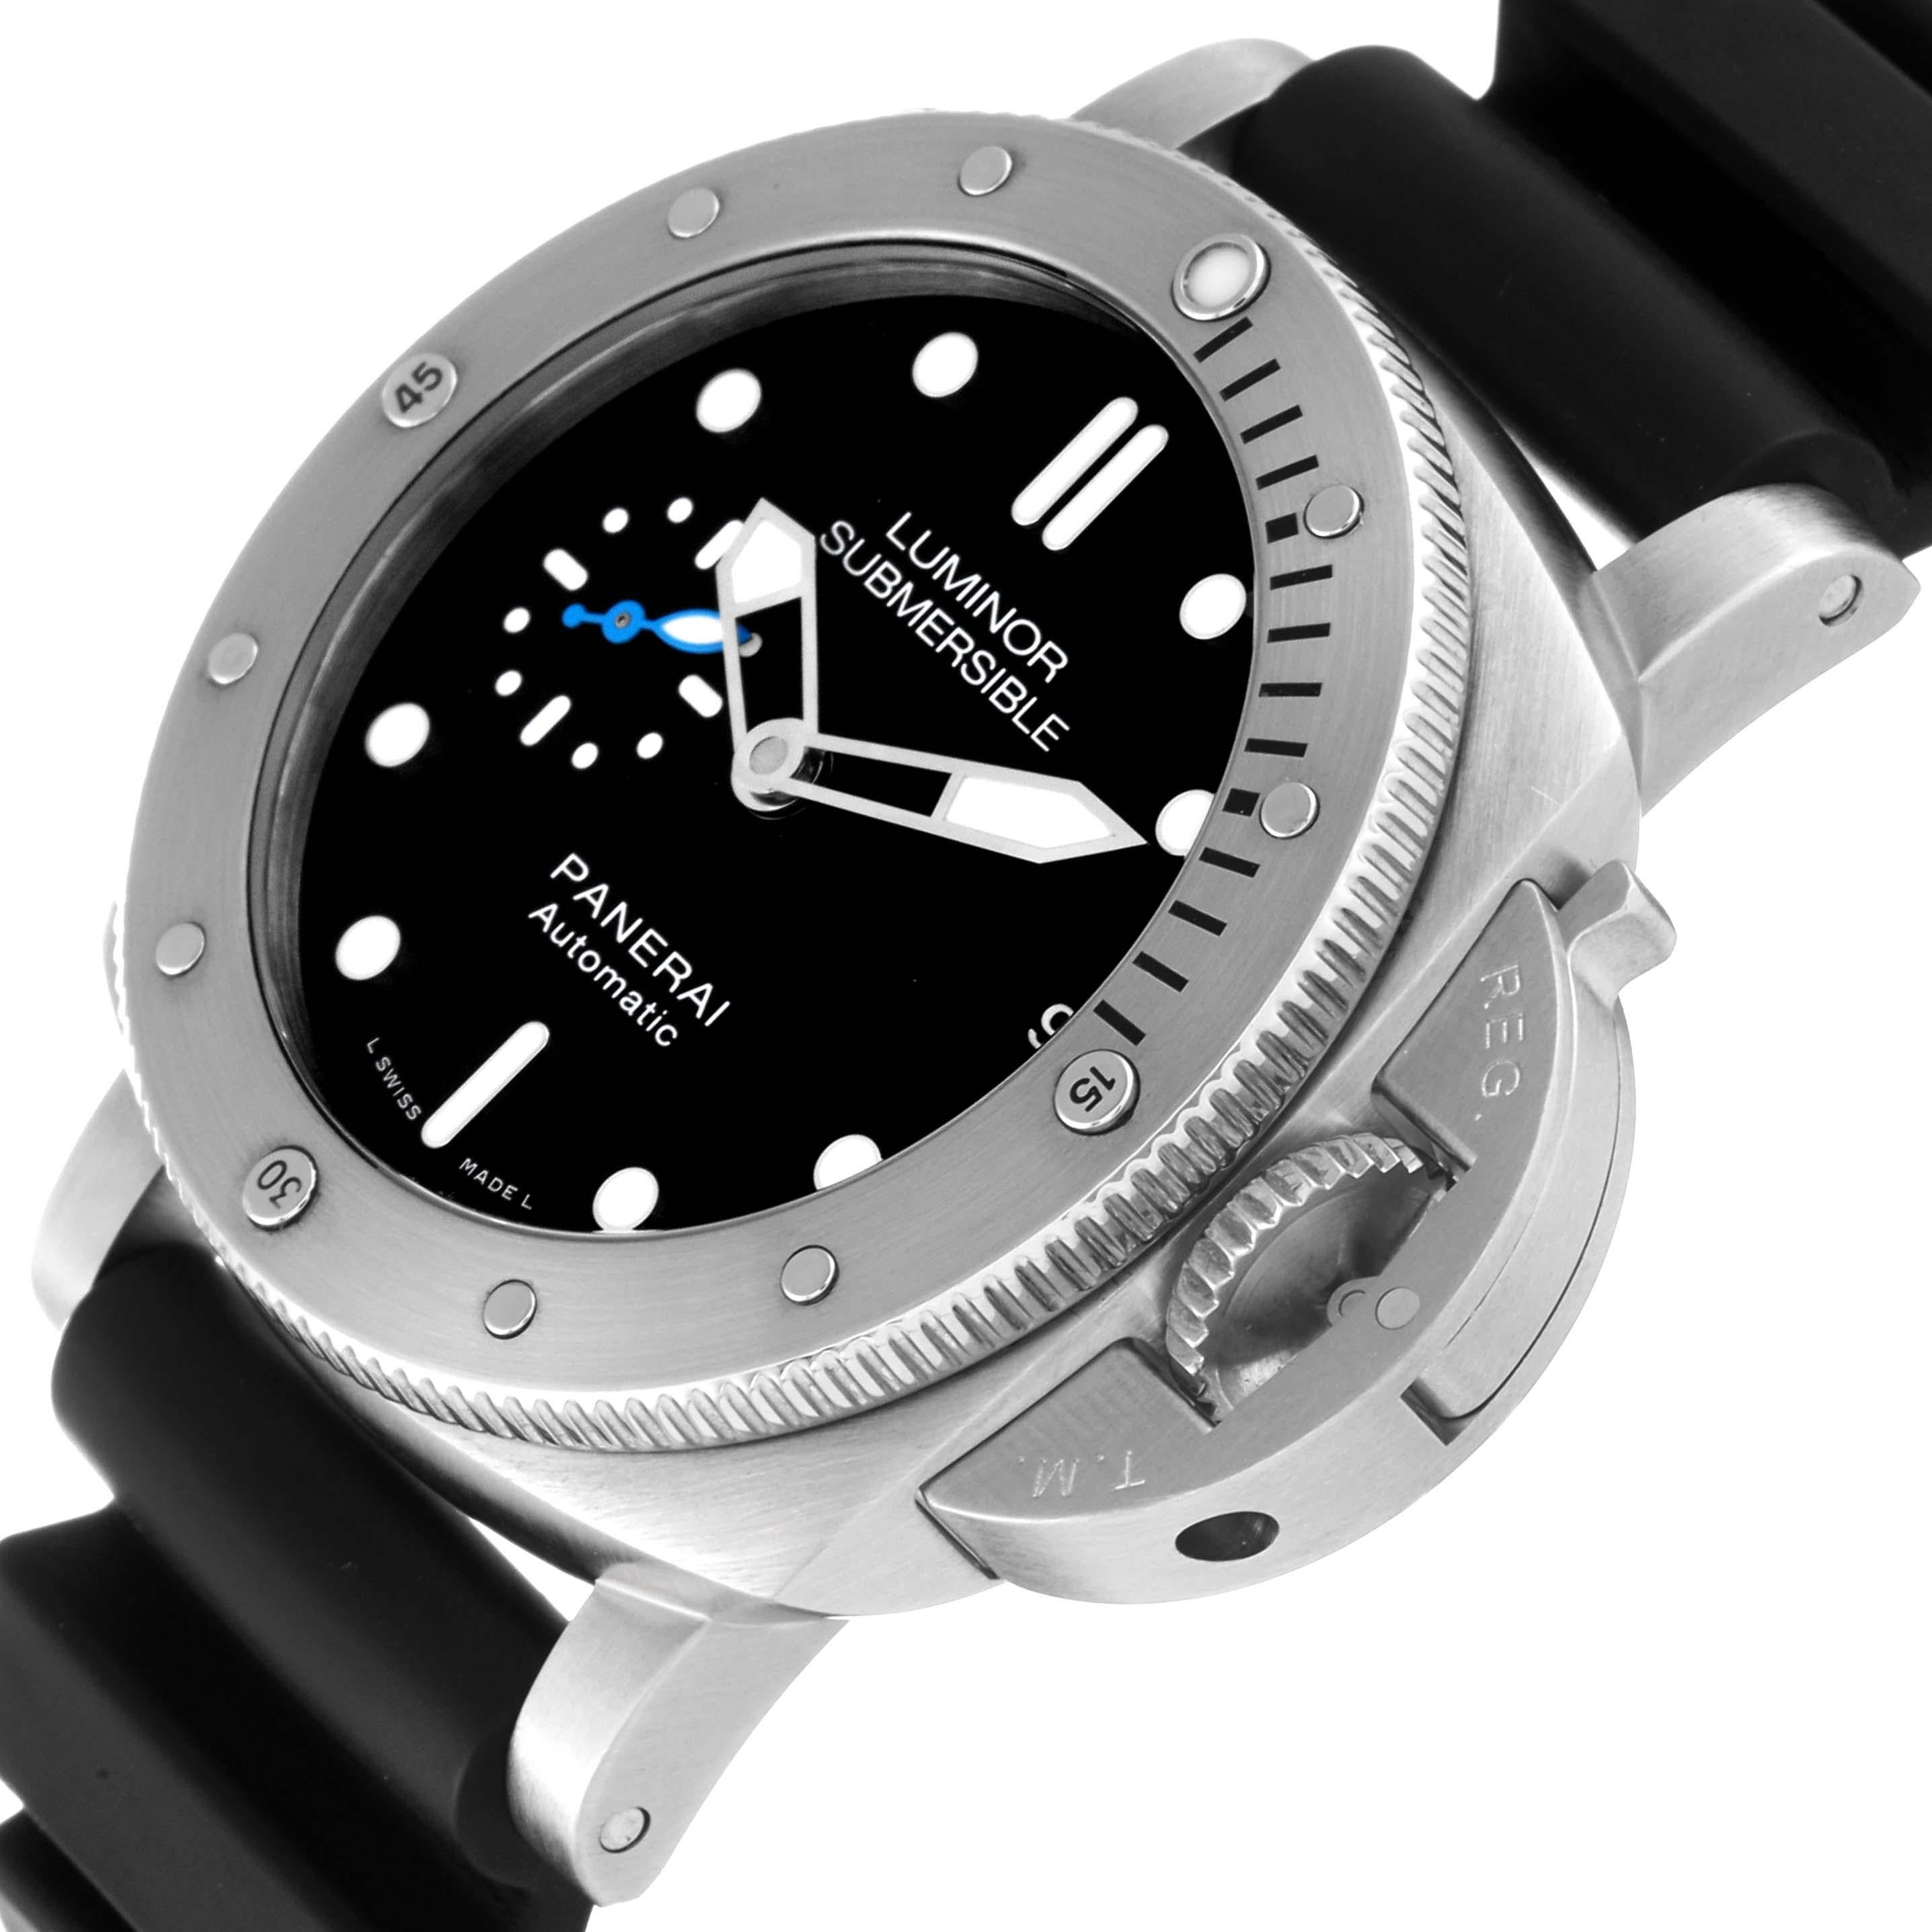 Panerai Luminor Submersible 42mm Steel Mens Watch PAM00682 Box Papers. Automatic self-winding movement. Two part cushion shaped stainless steel case 42.0 mm in diameter. Panerai patented crown protector. Stainless steel anti-clockwise rotating bezel